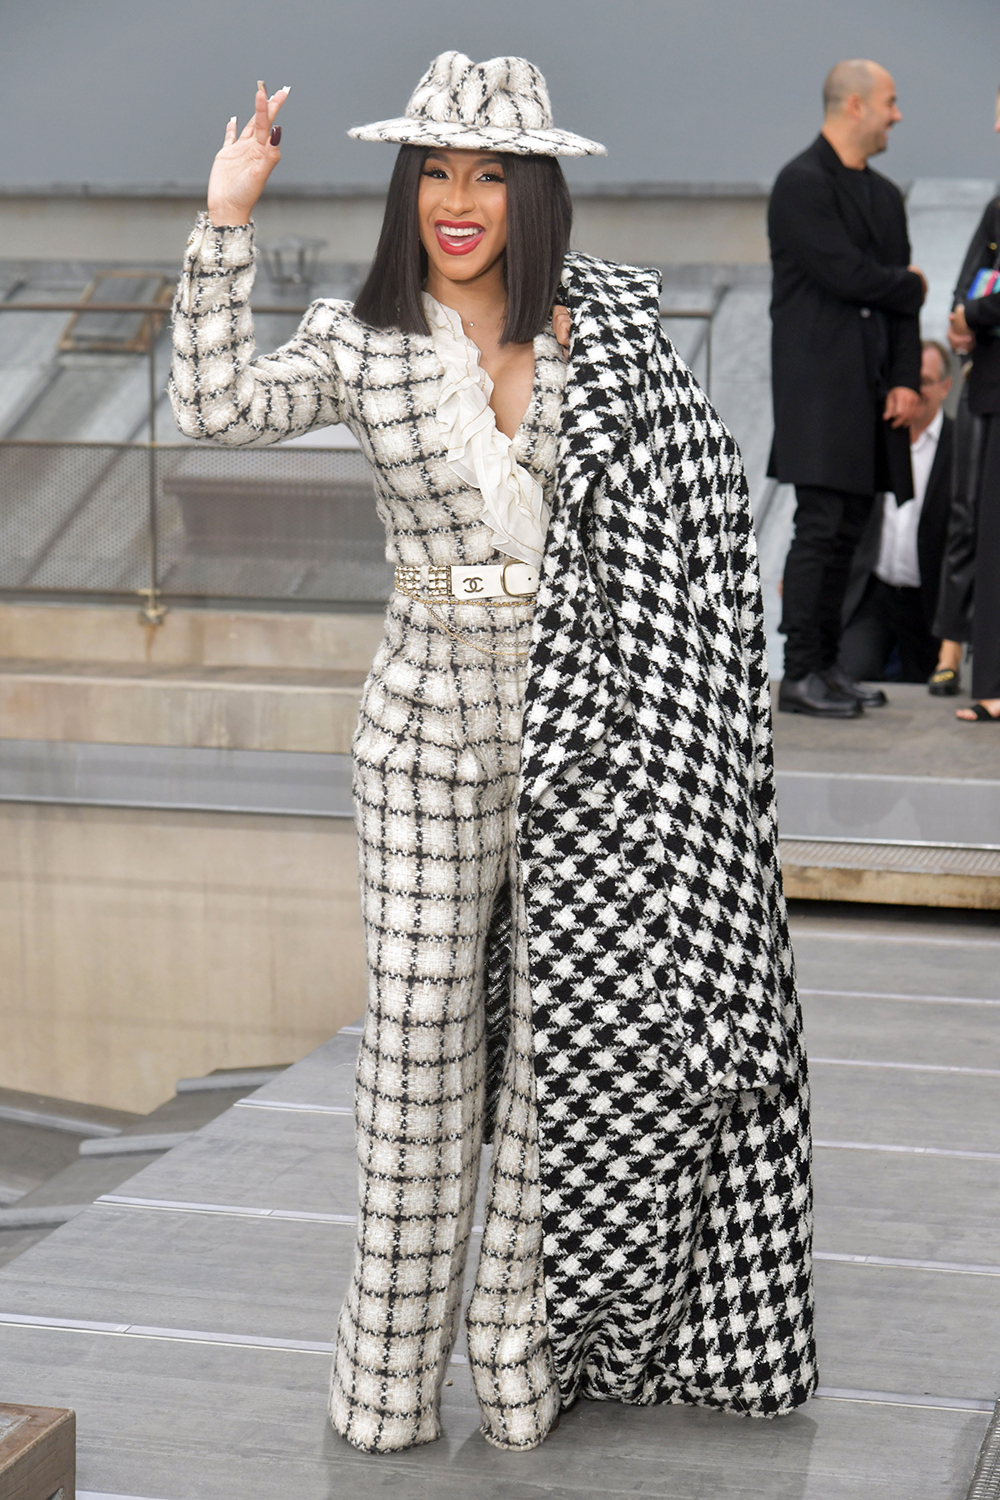 Cardi B goes undercover at Paris fashion Week - Culture